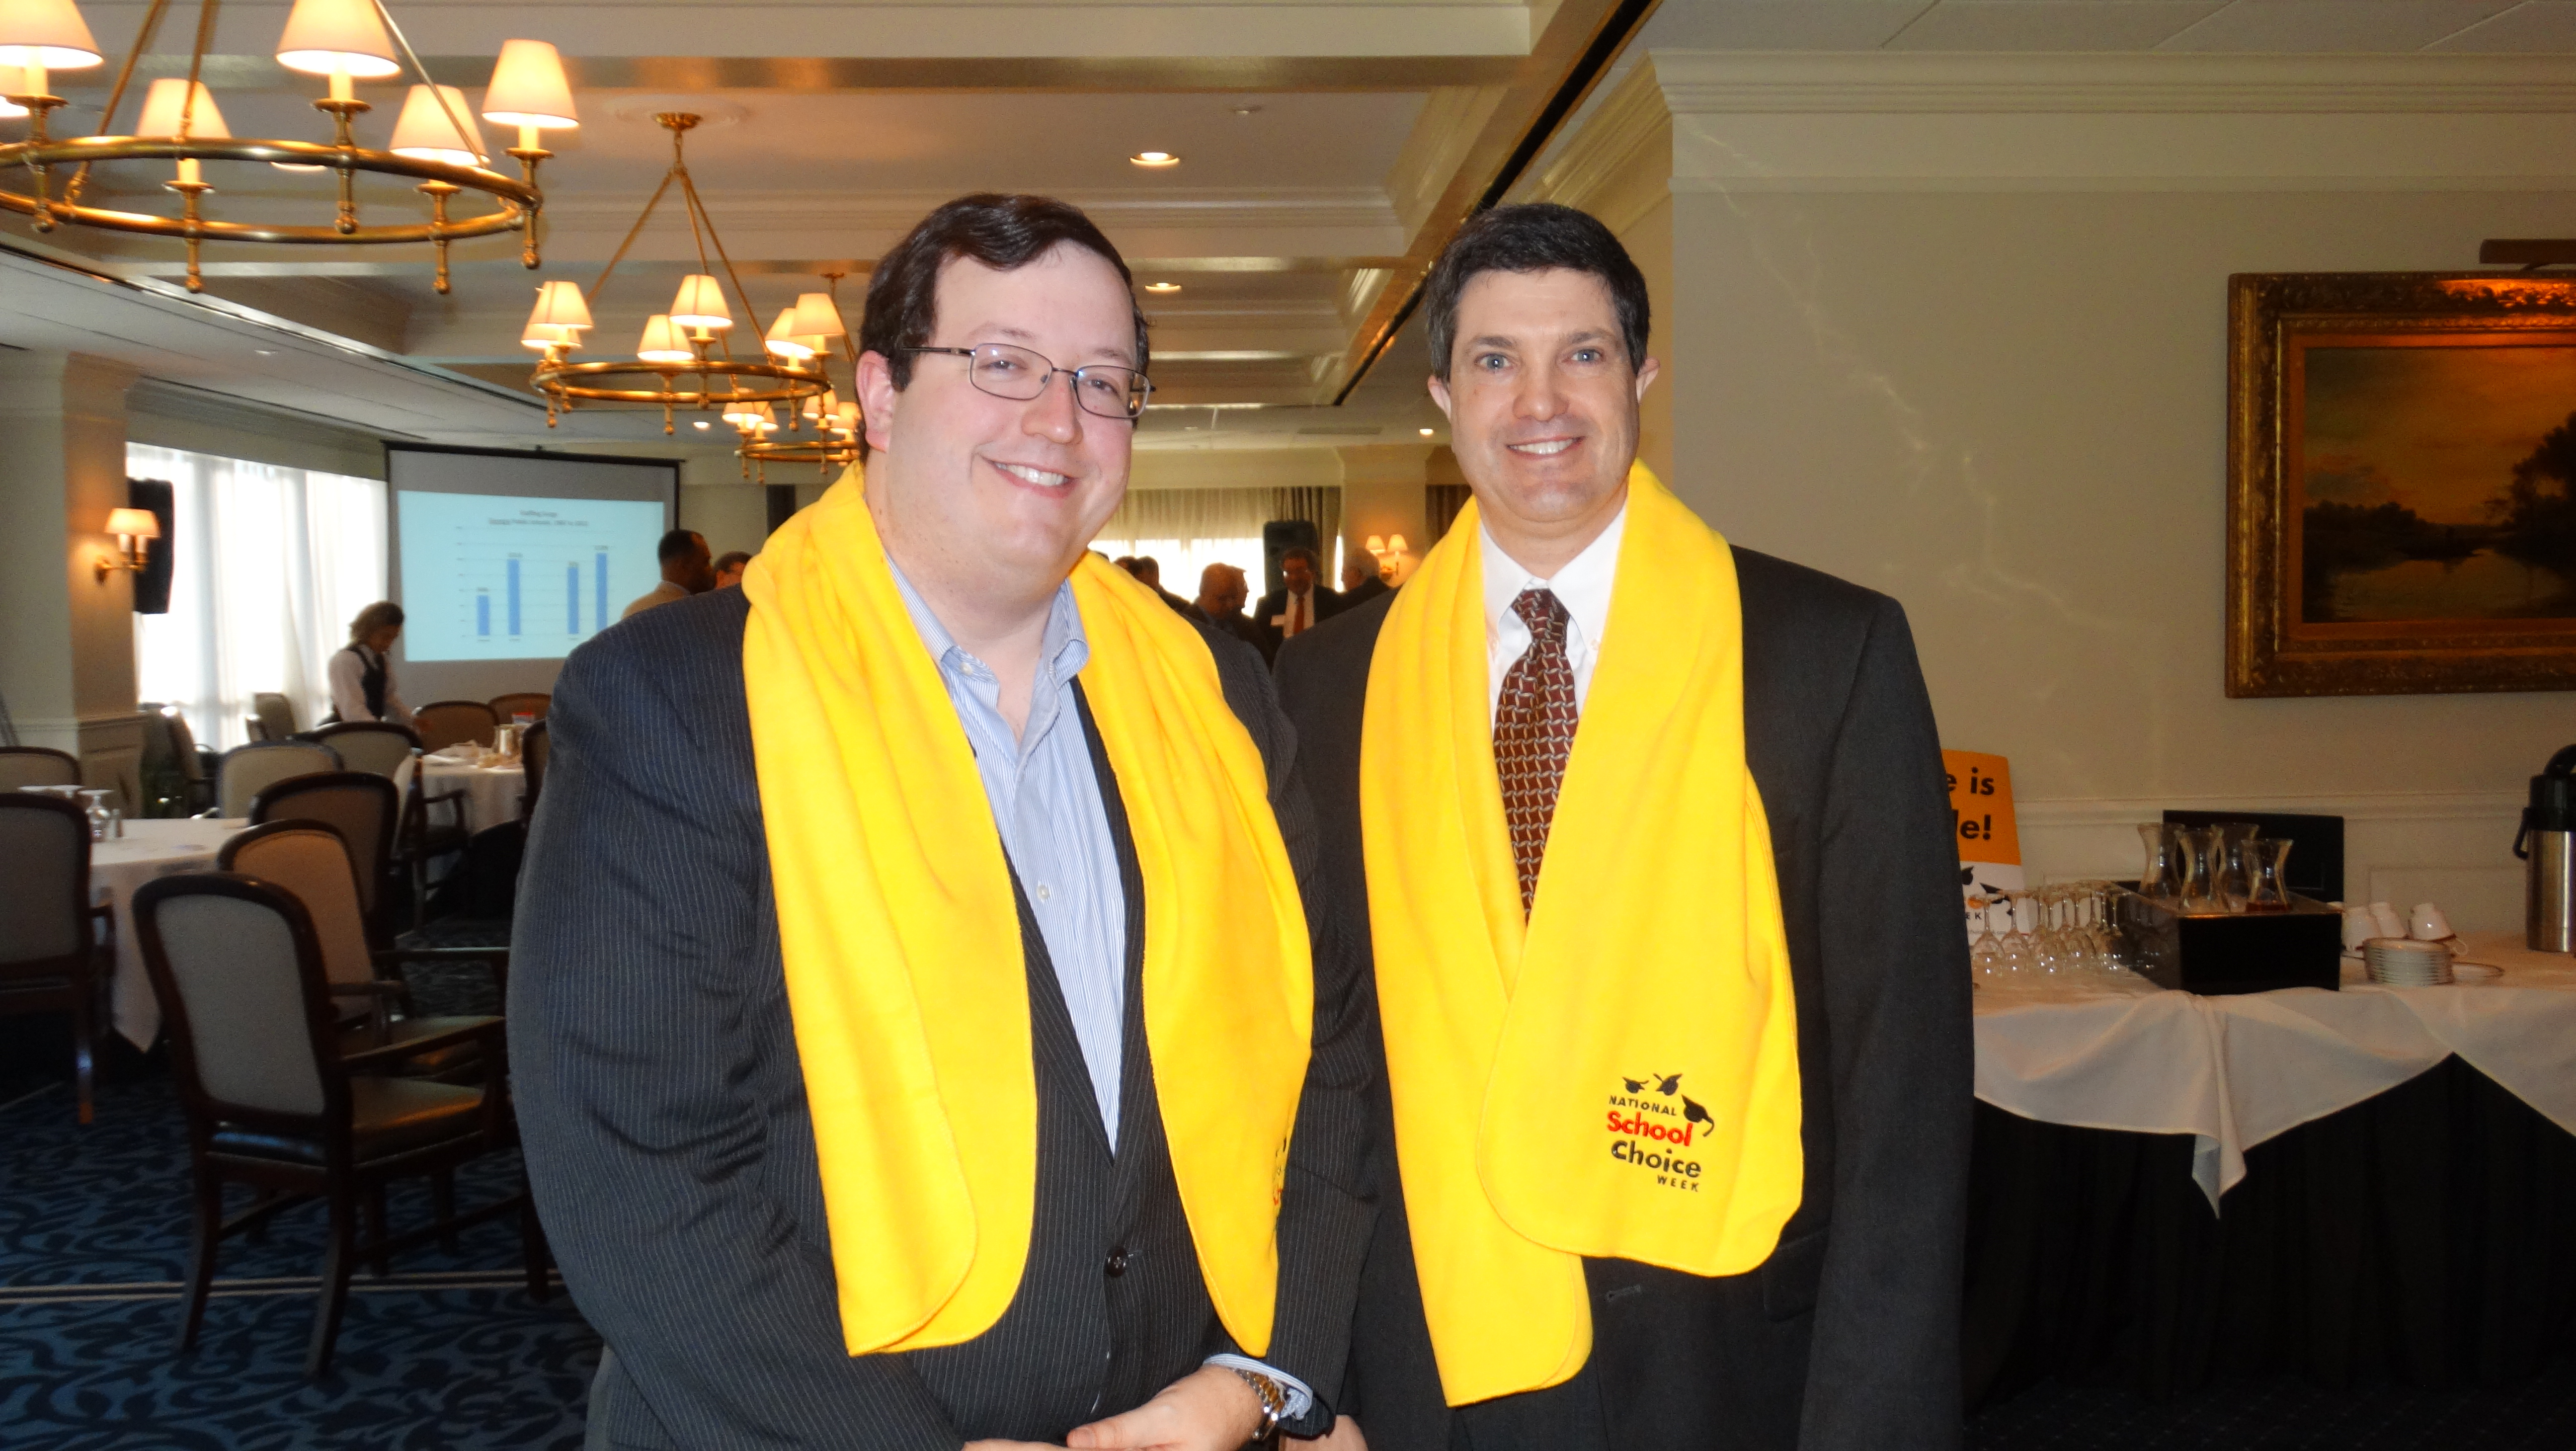 Georgia State Senator Josh McKoon and Foundation President Kelly McCutchen wear their National School Choice Week "woobie" at the Foundation's annual event on January 21. 